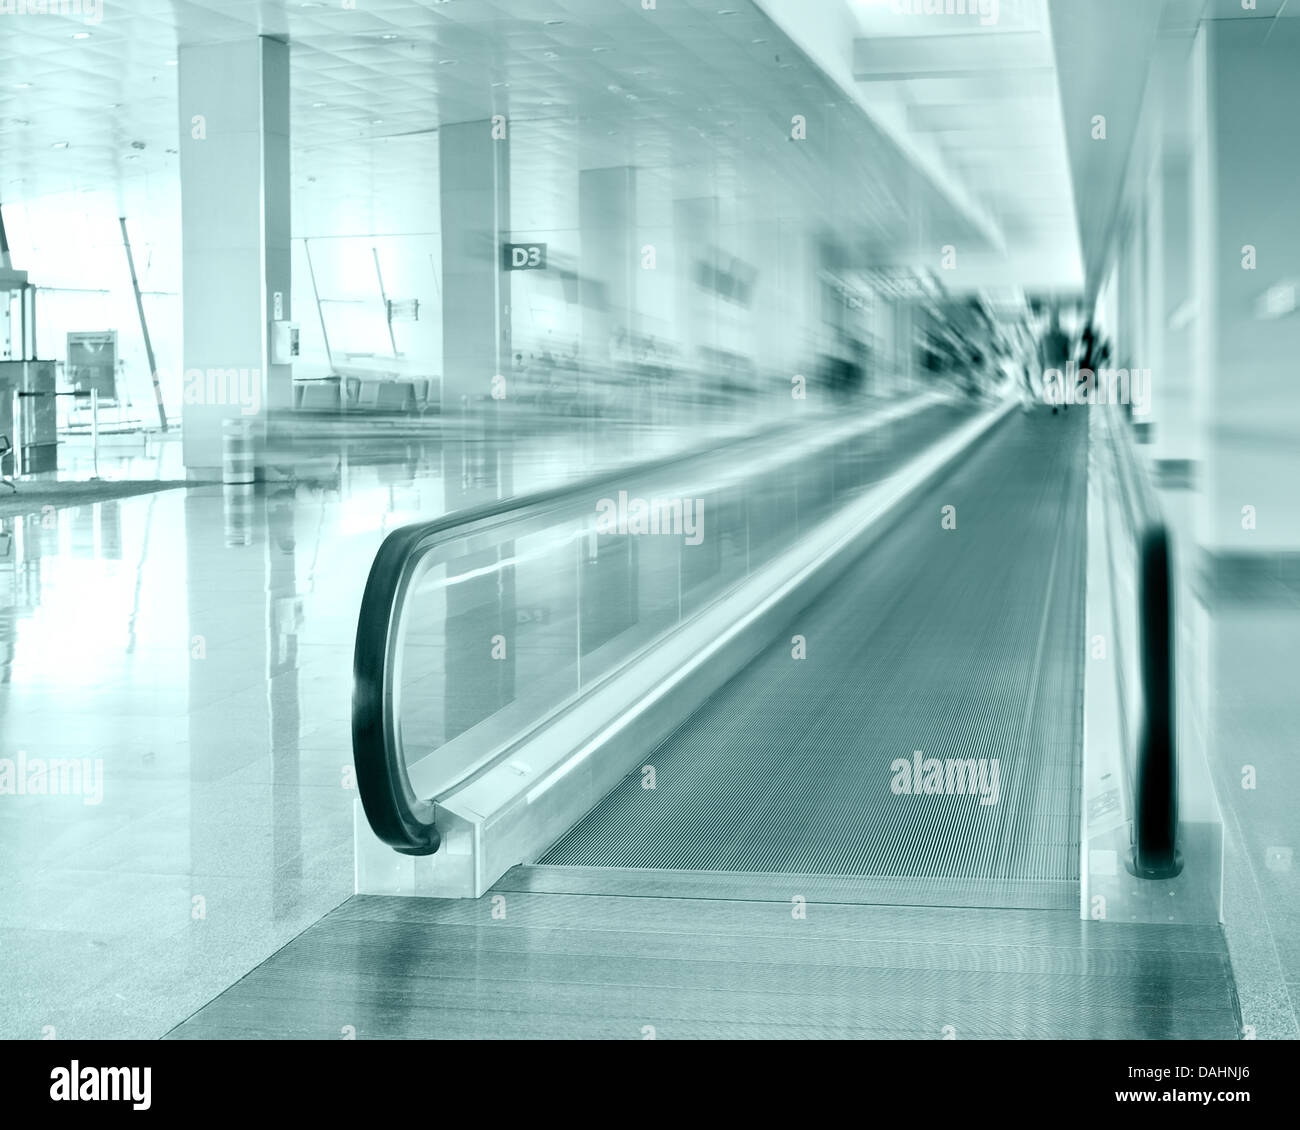 Travel concept. Escalator inside modern airport terminal. Image in blue colors with blur Stock Photo